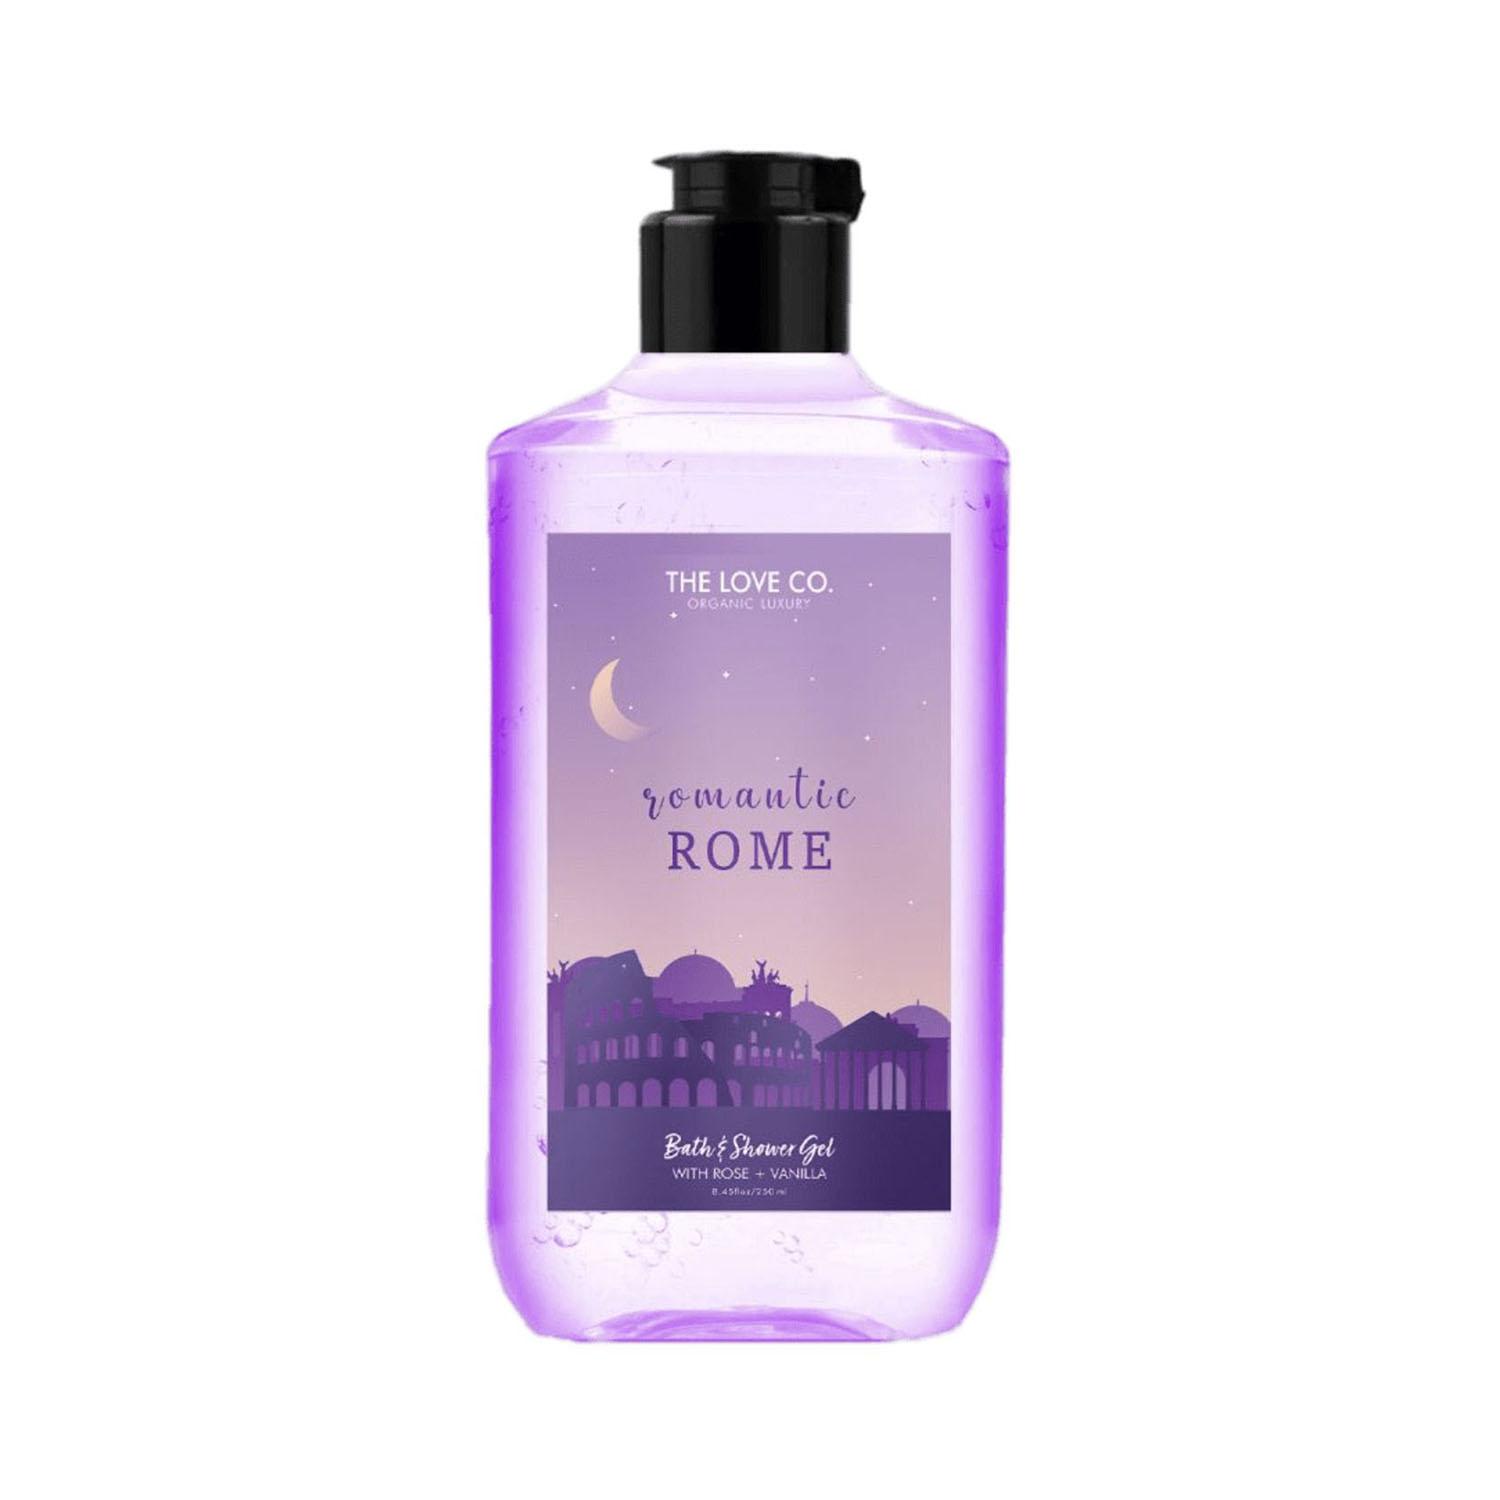 THE LOVE CO. Romantic Rome Body and Shower Gel (250ml)